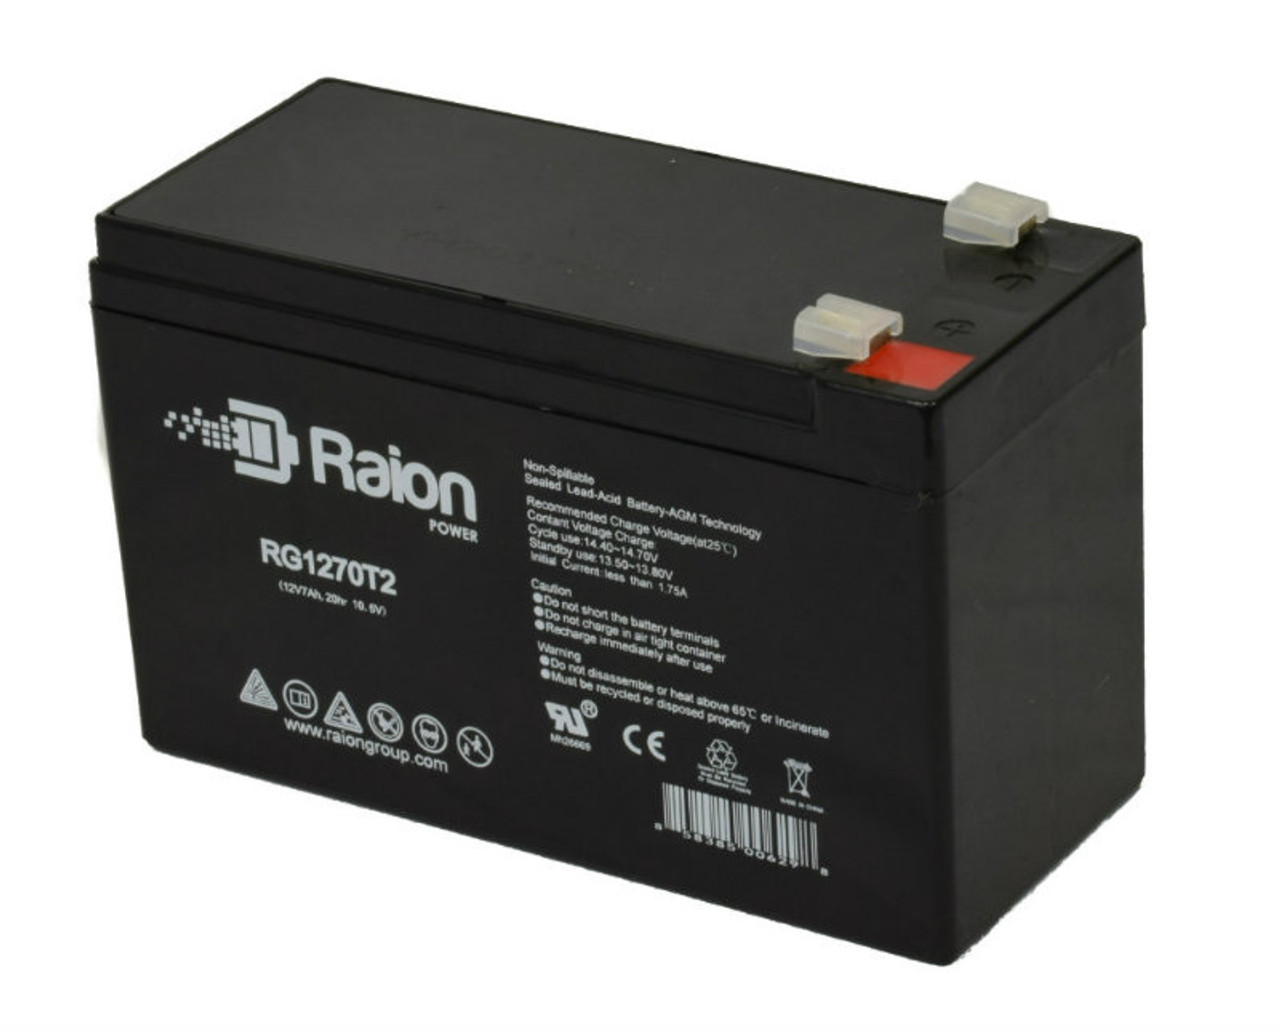 Raion Power RG1270T1 12V 7Ah Non-Spillable Replacement Battery for Ocean NP6-12